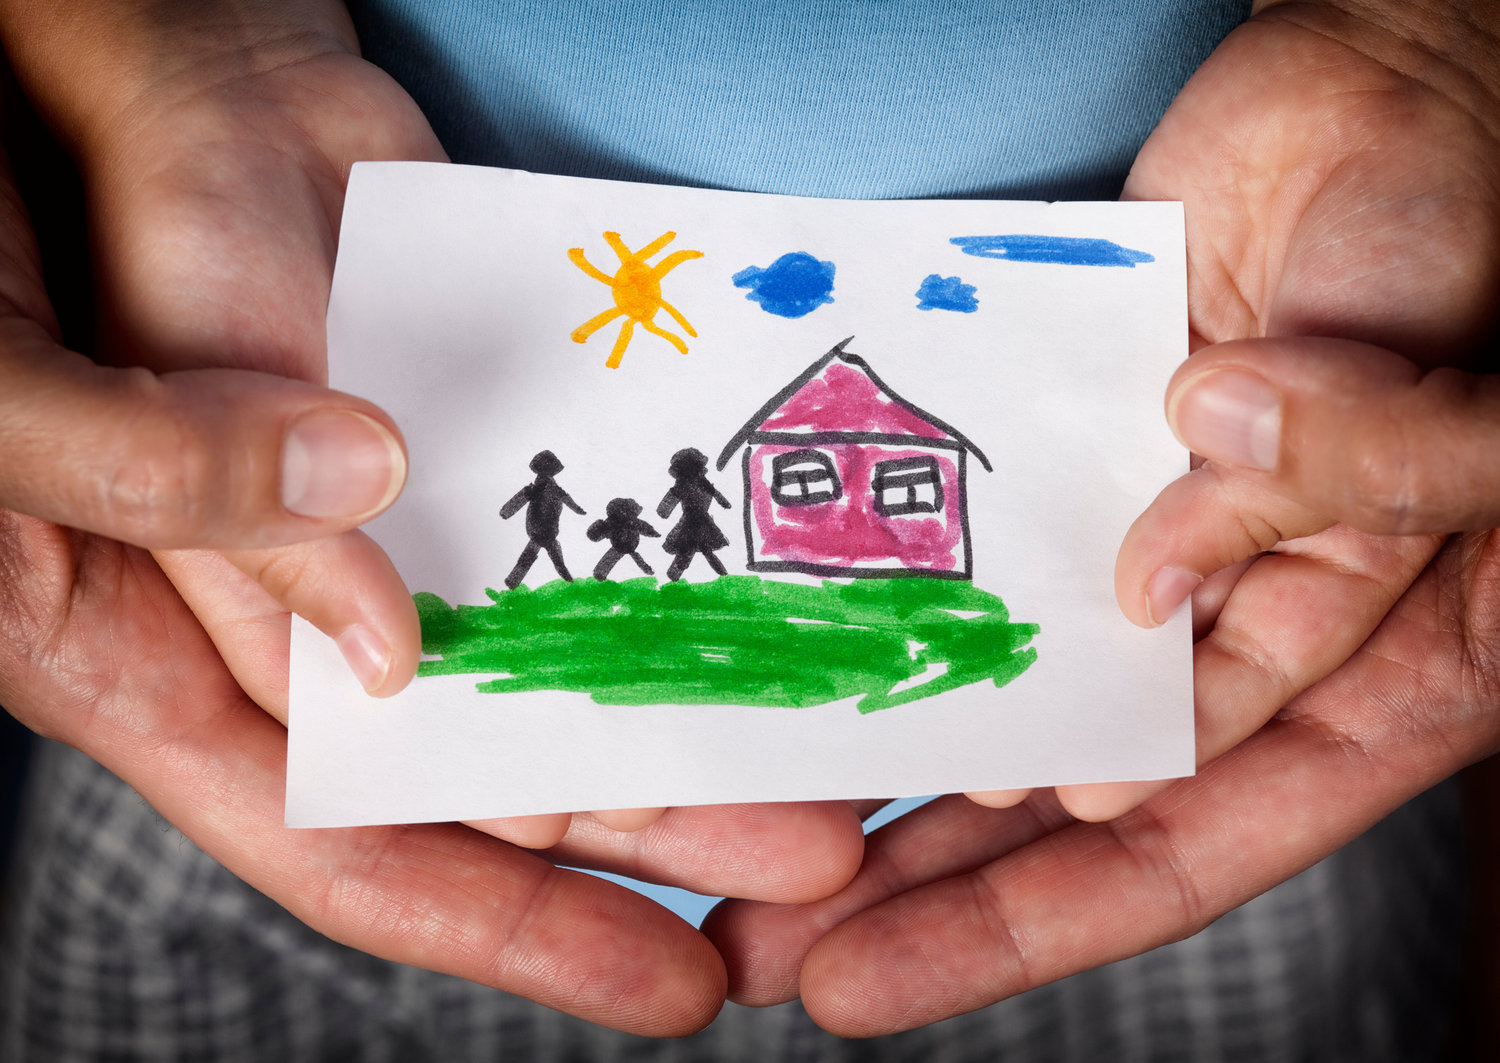 Child and his mom holding a drawn house with family.